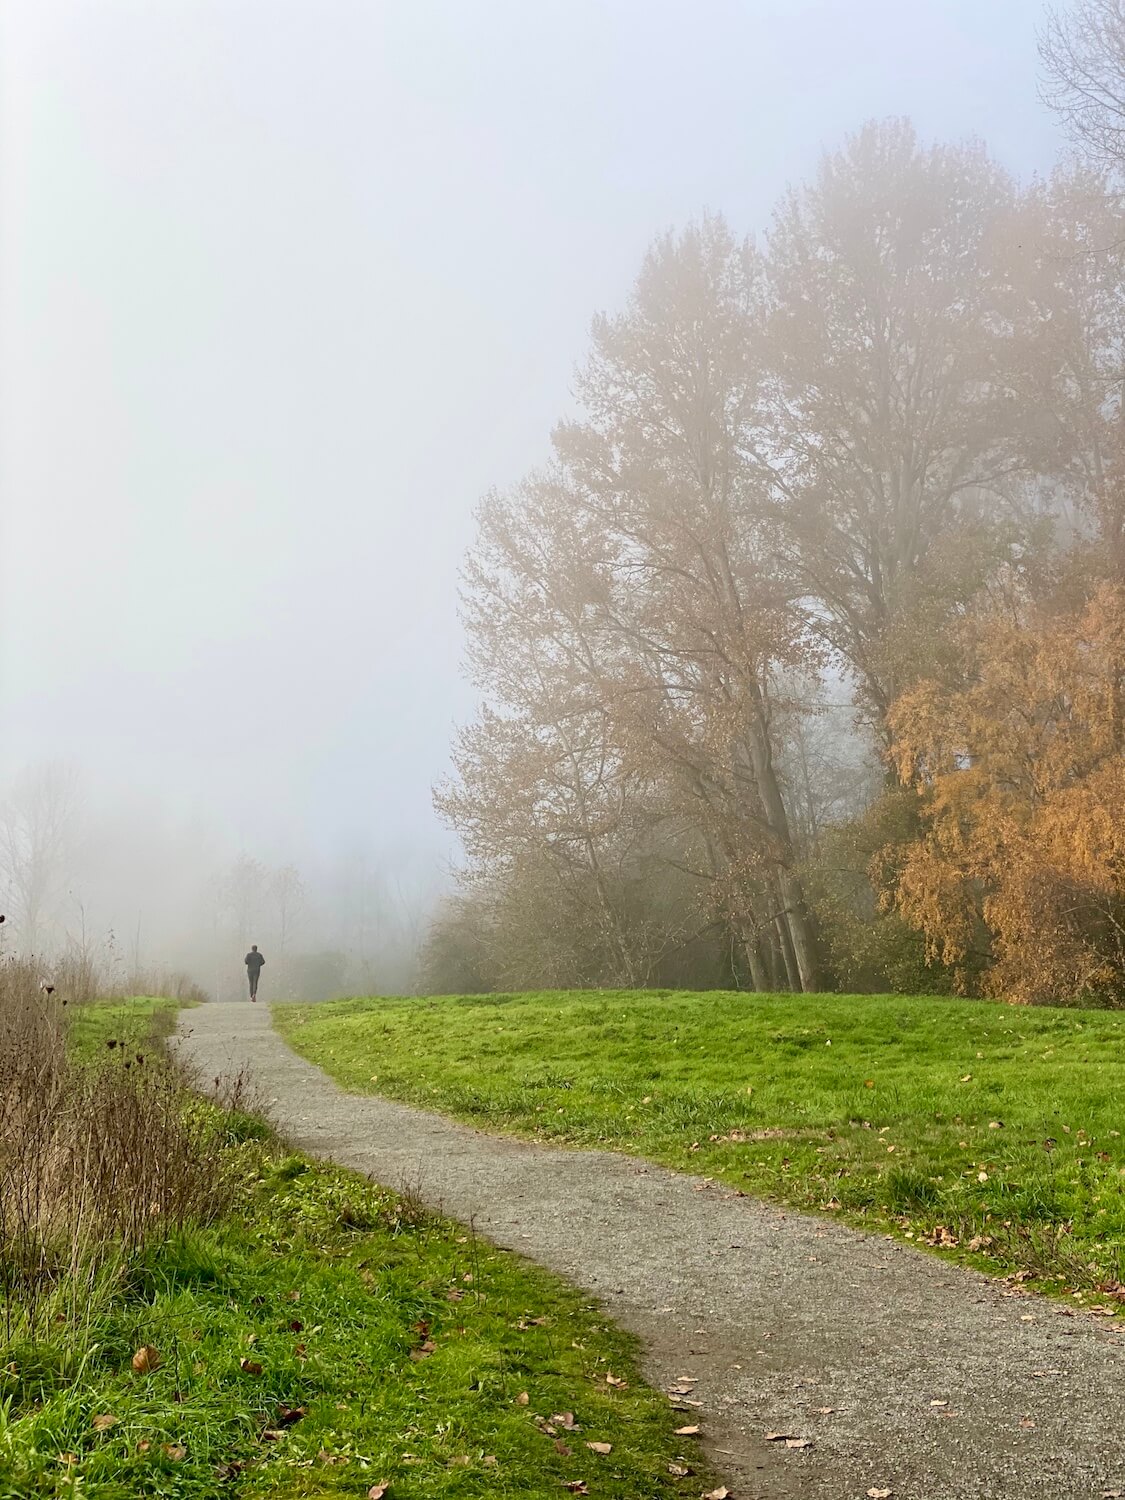 A misty fall day at the University of Washington shows a gravel path in between bright green grass while deciduous trees with orange leaves hover overhead. In the distance a person walks along the path into the misty background.